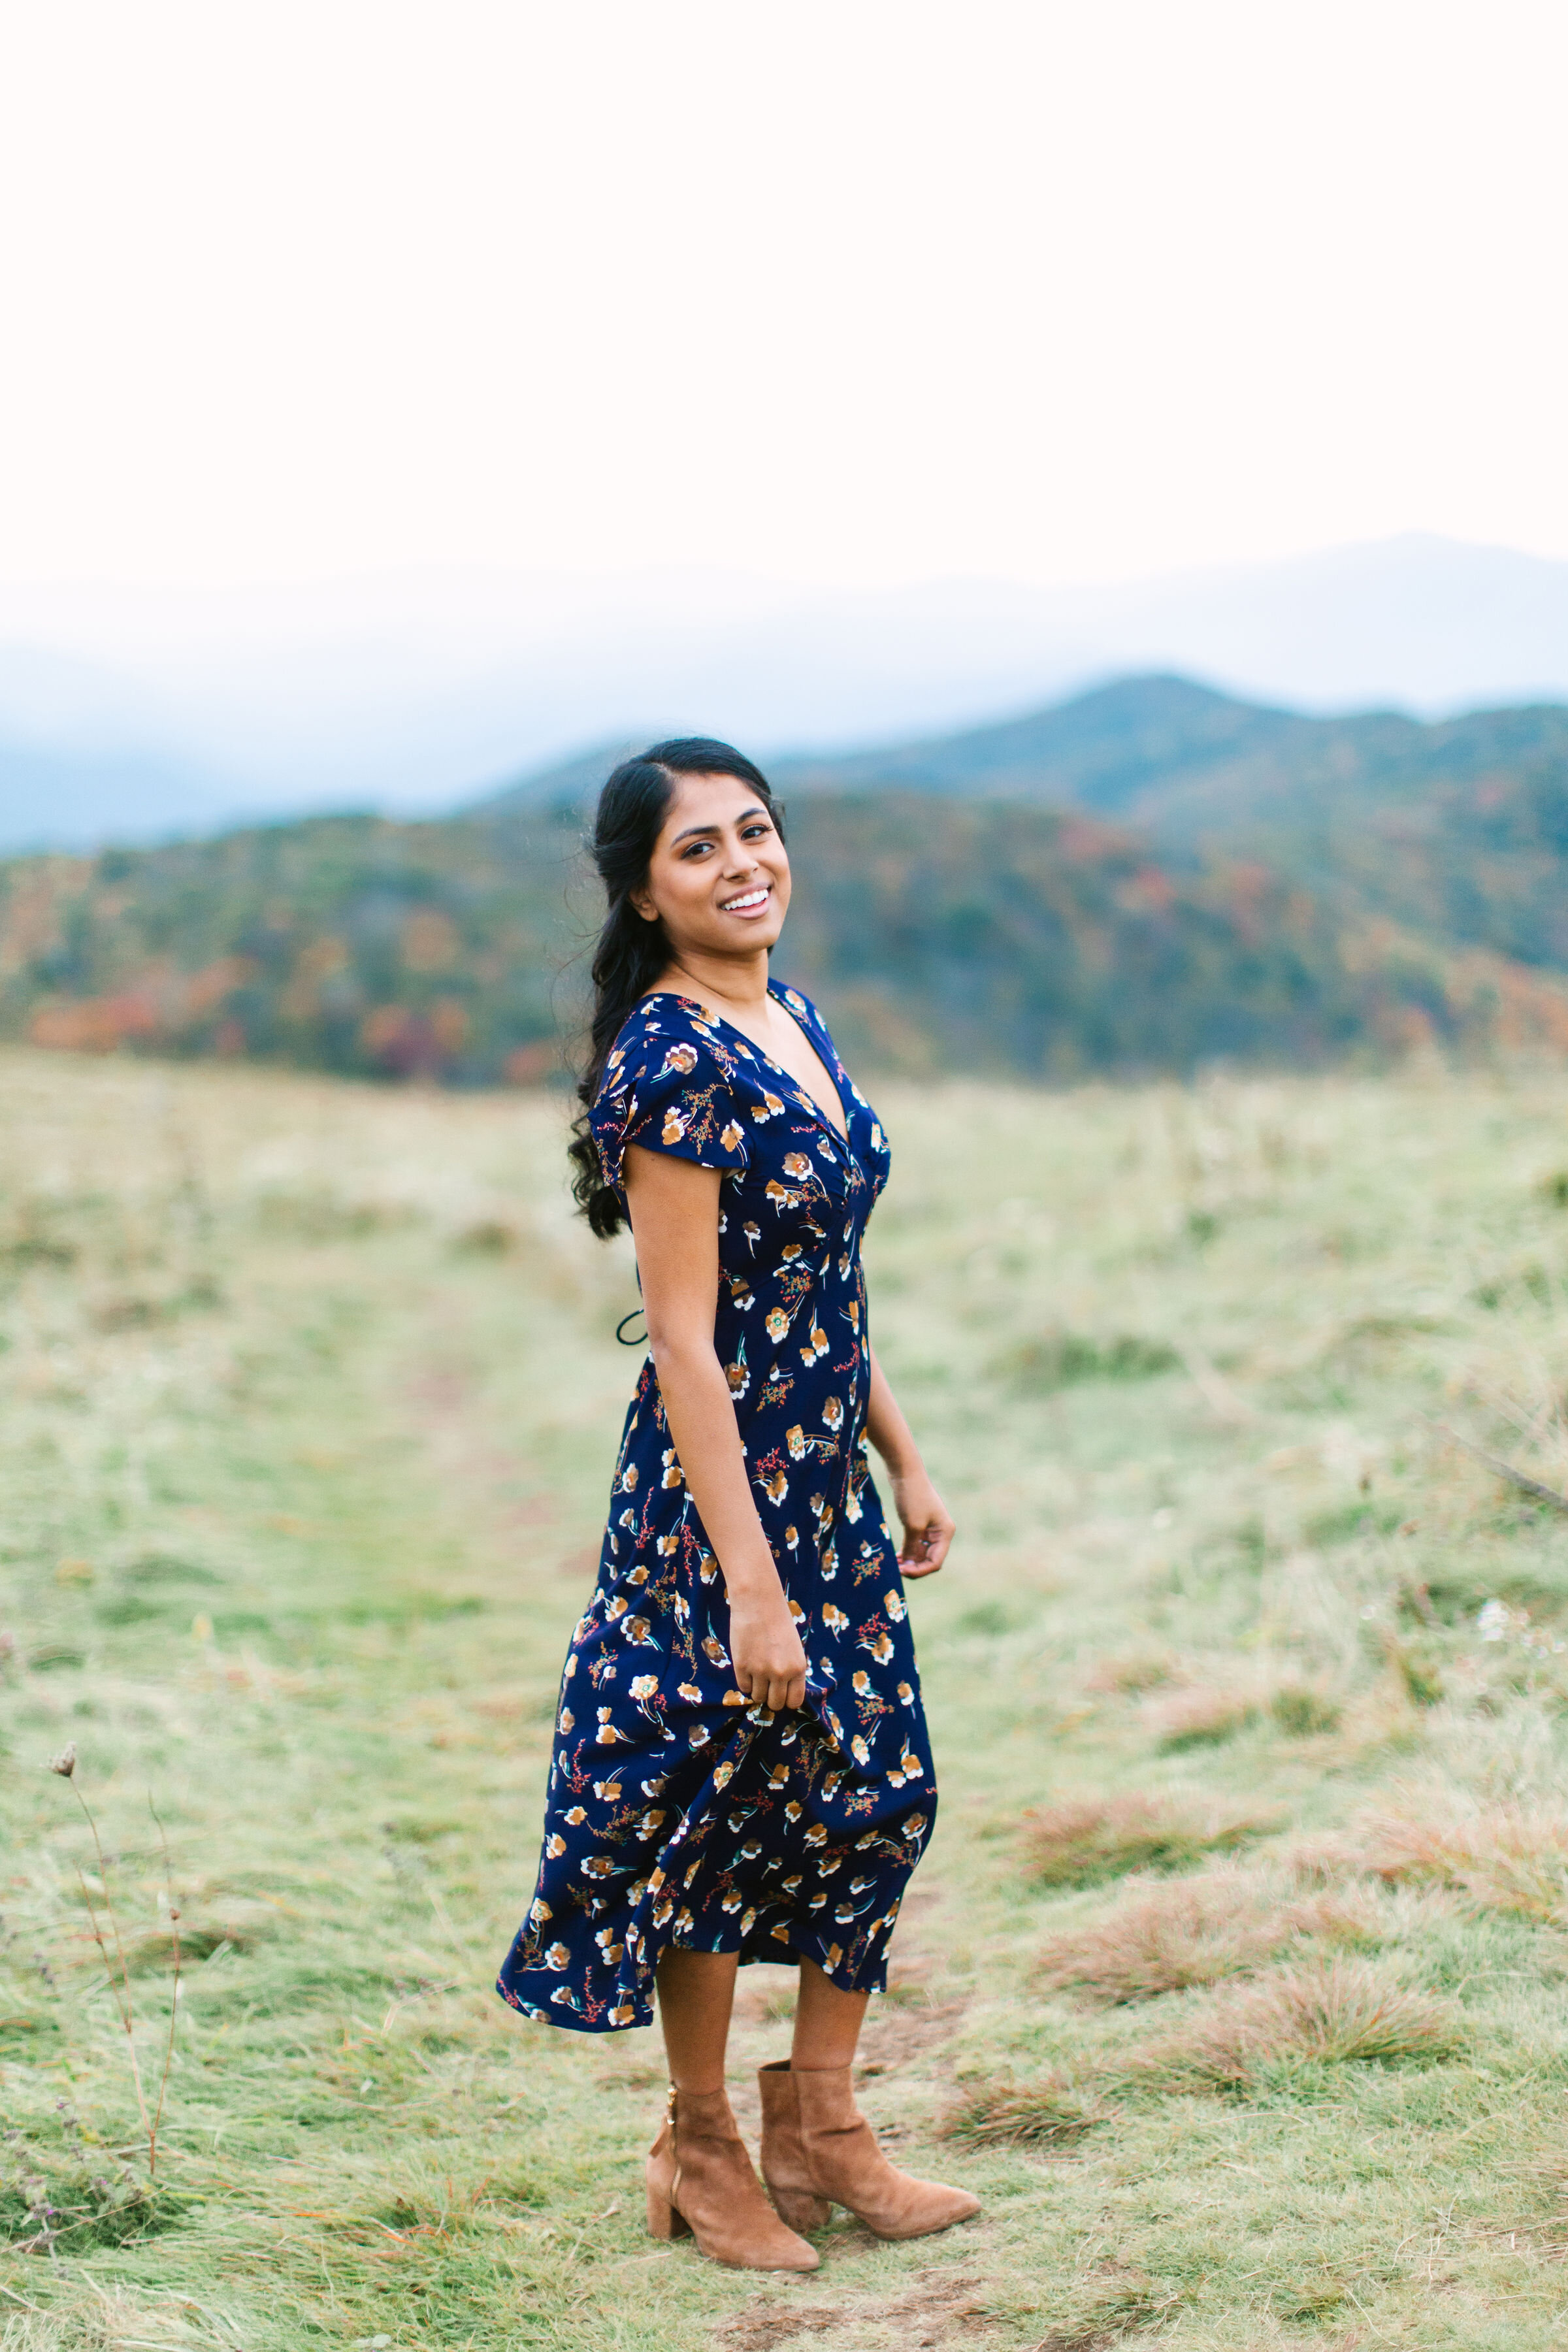 Max Patch Fall Couple Engagement Photos |  Beautiful indian woman in dress on mountaintop